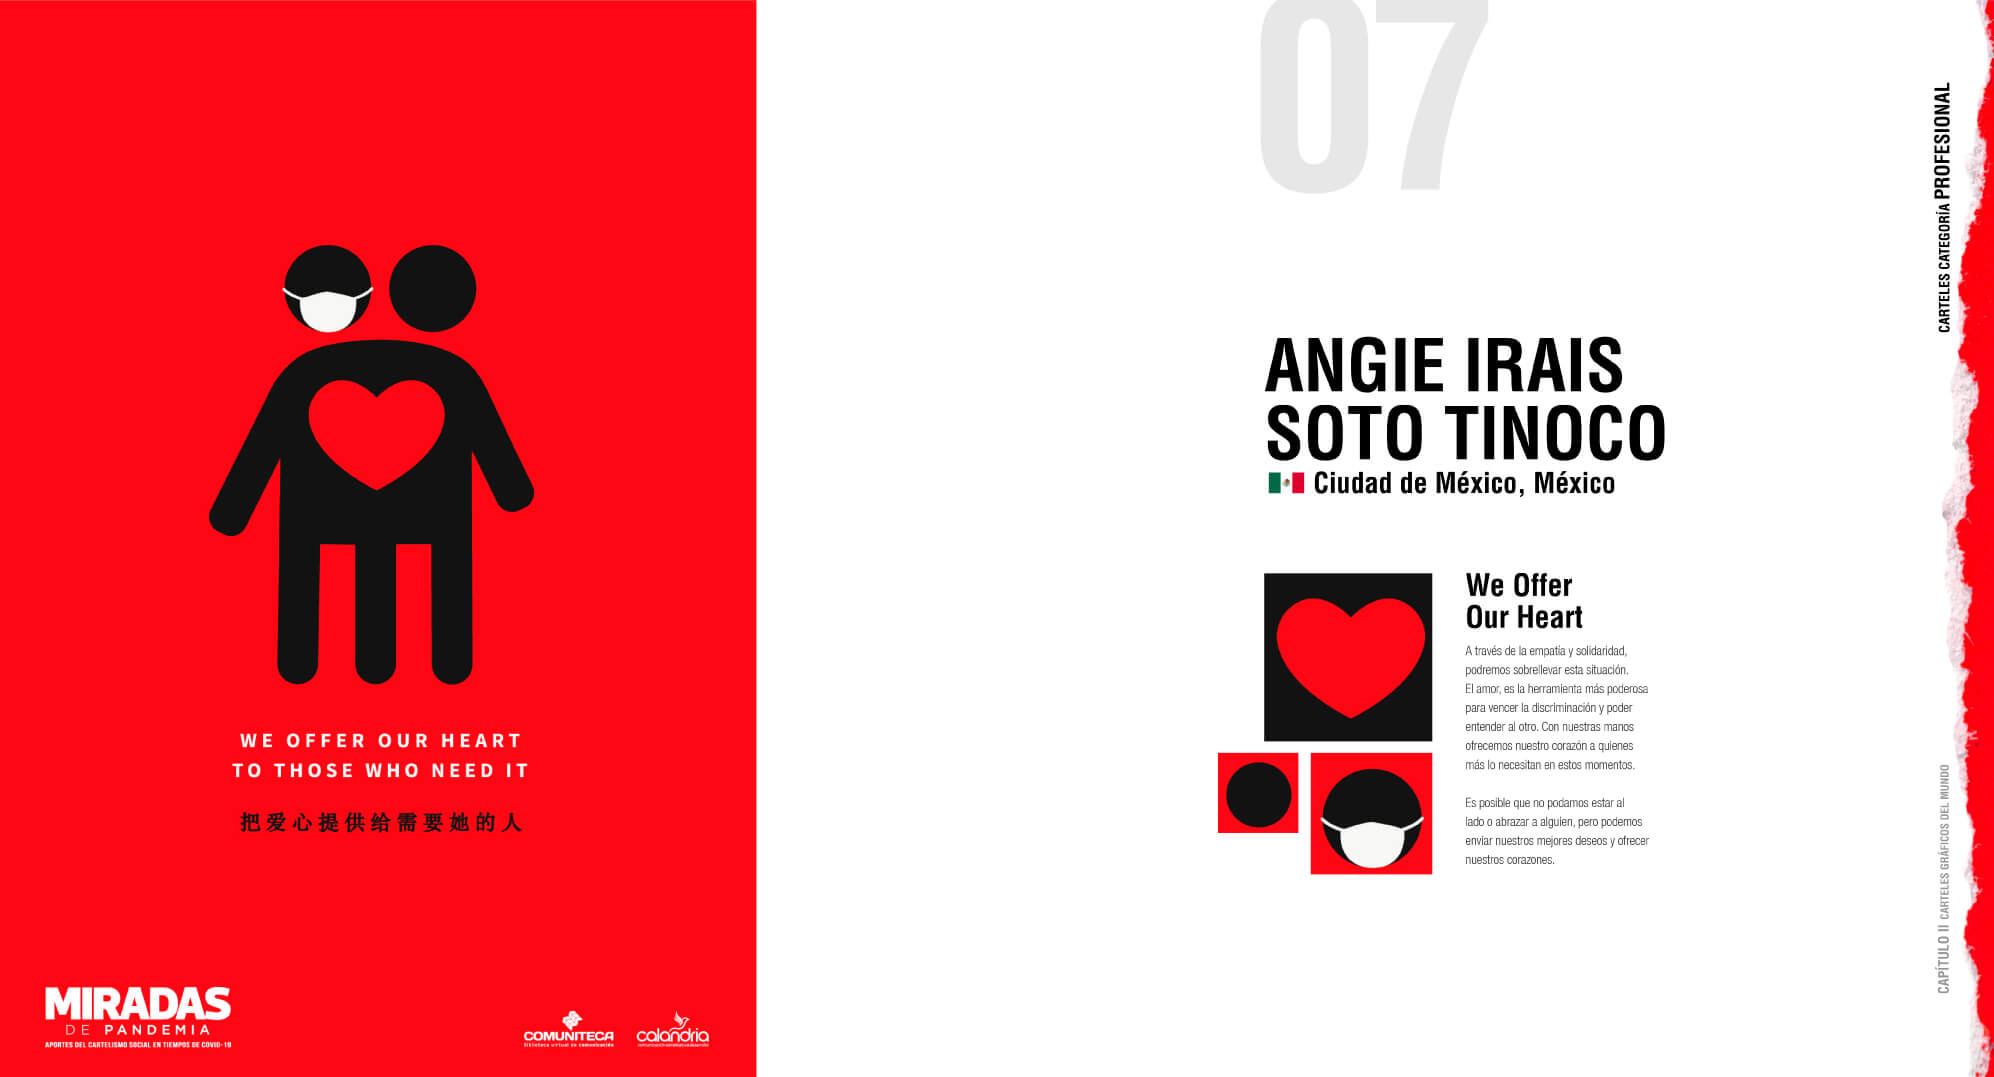 We offer our heart - International Poster ExhIbition by UN AIDS-12